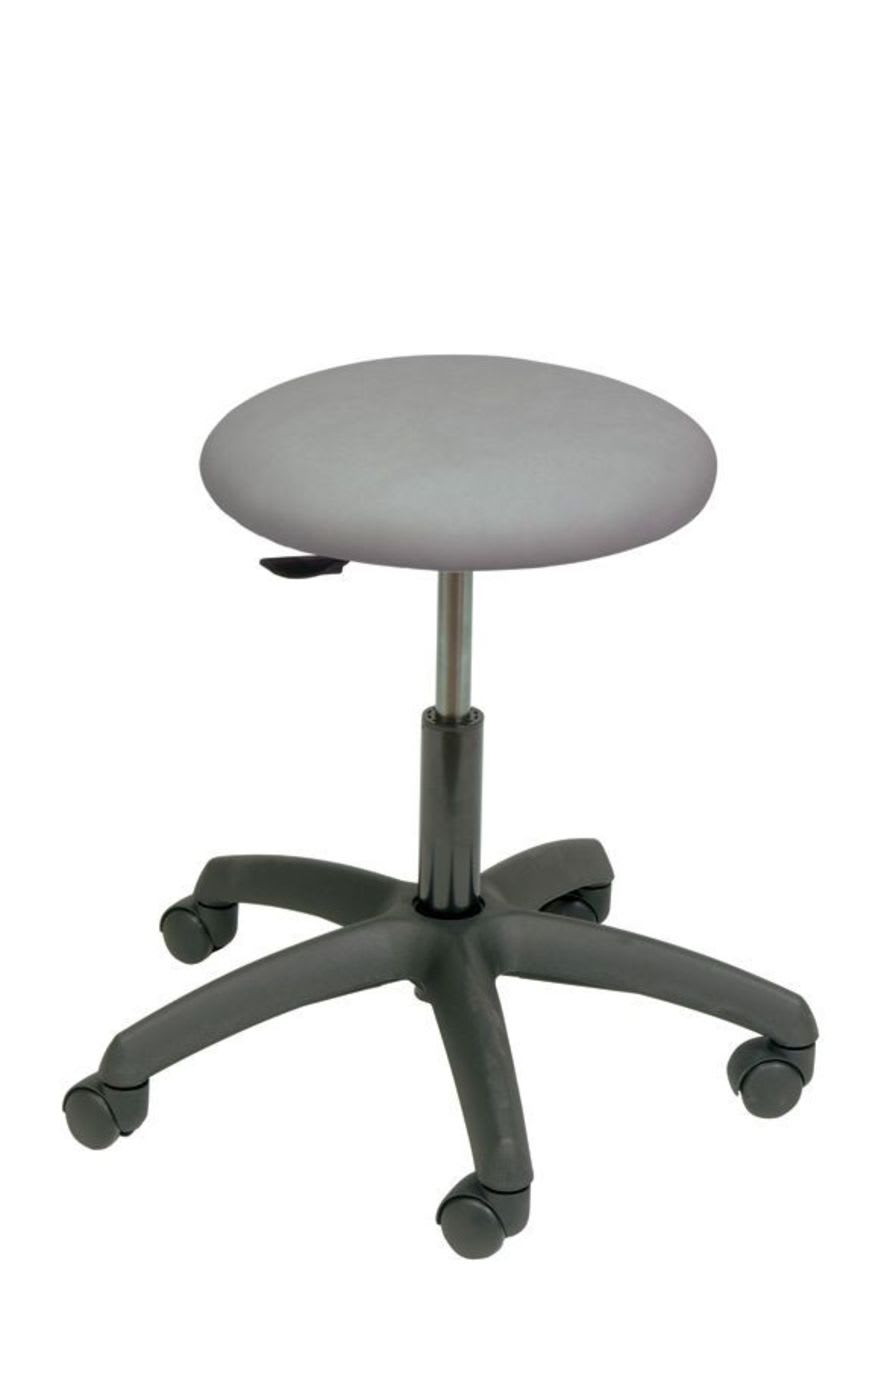 Medical stool / height-adjustable / on casters S-2610 Ecopostural